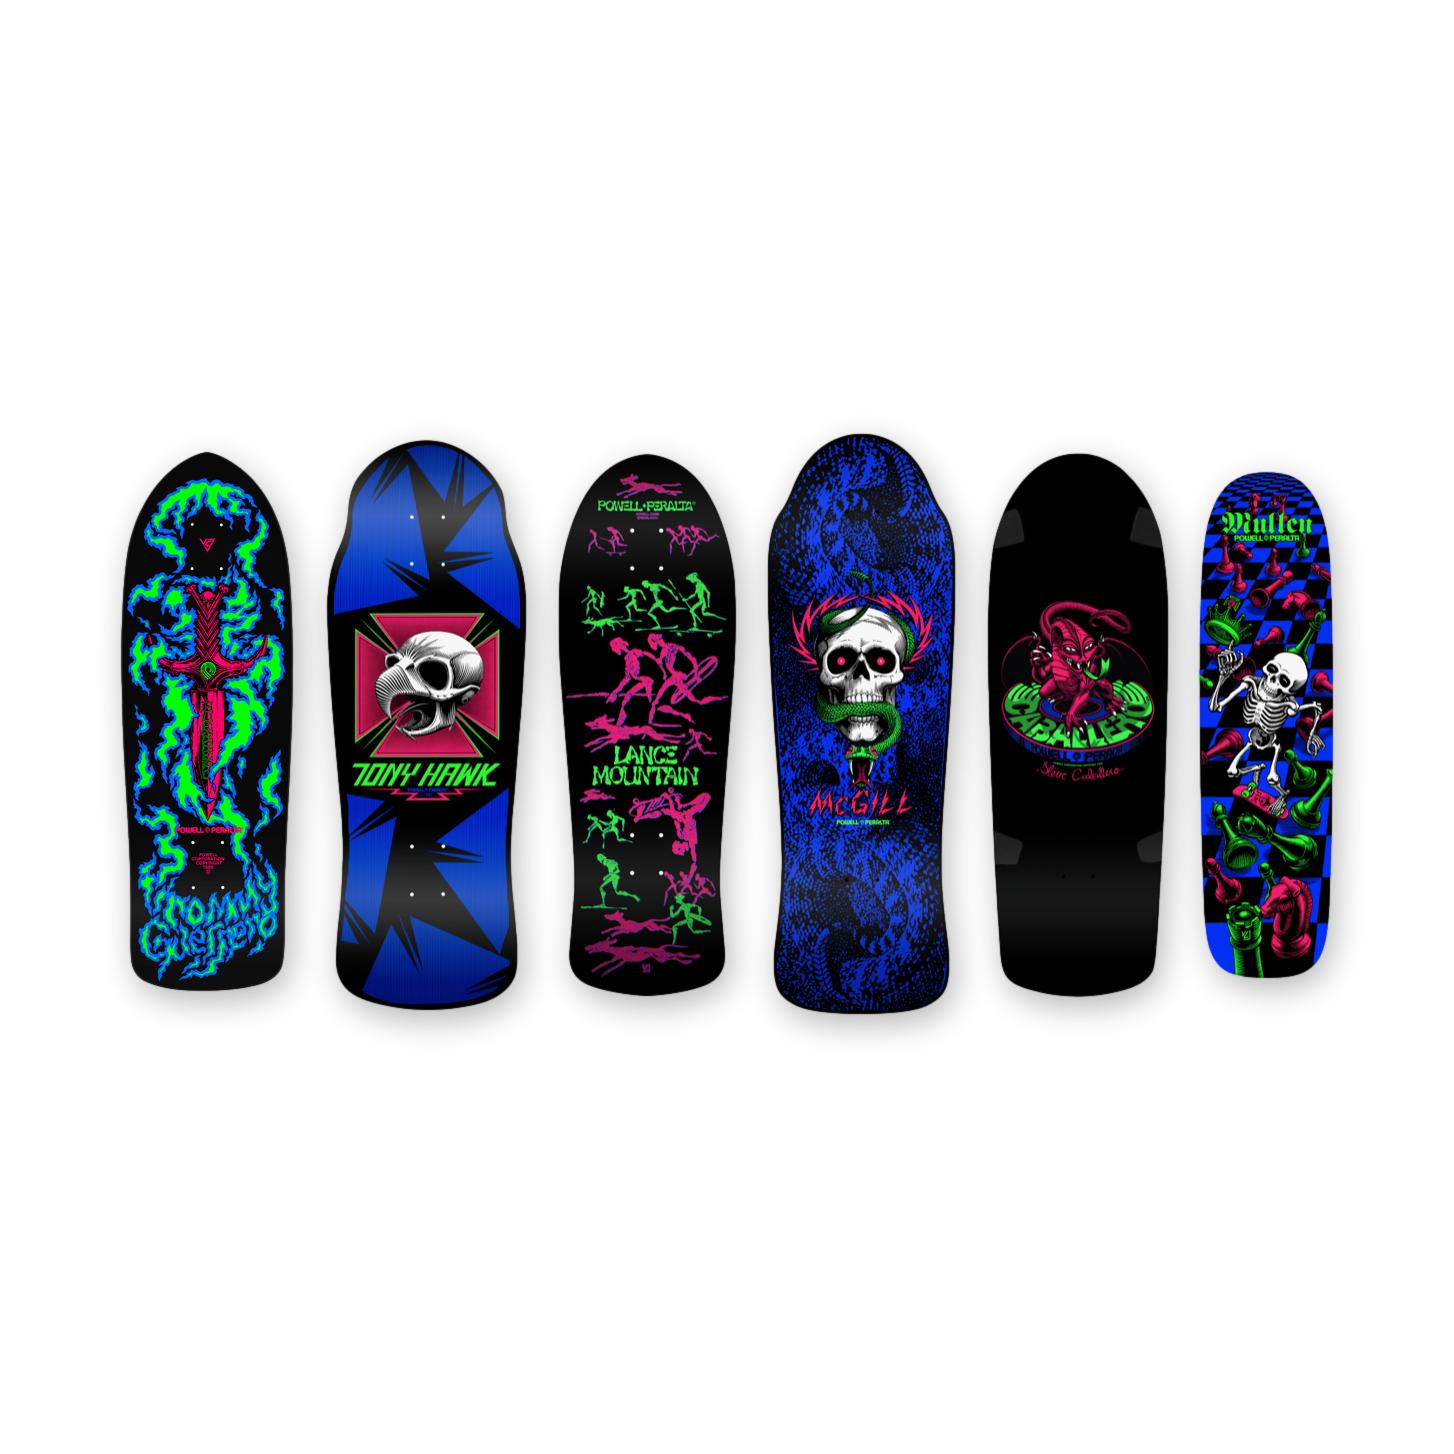 Powell-Peralta Re-Issue Limited Skateboard Decks, Series 14, Tommy Guerrero